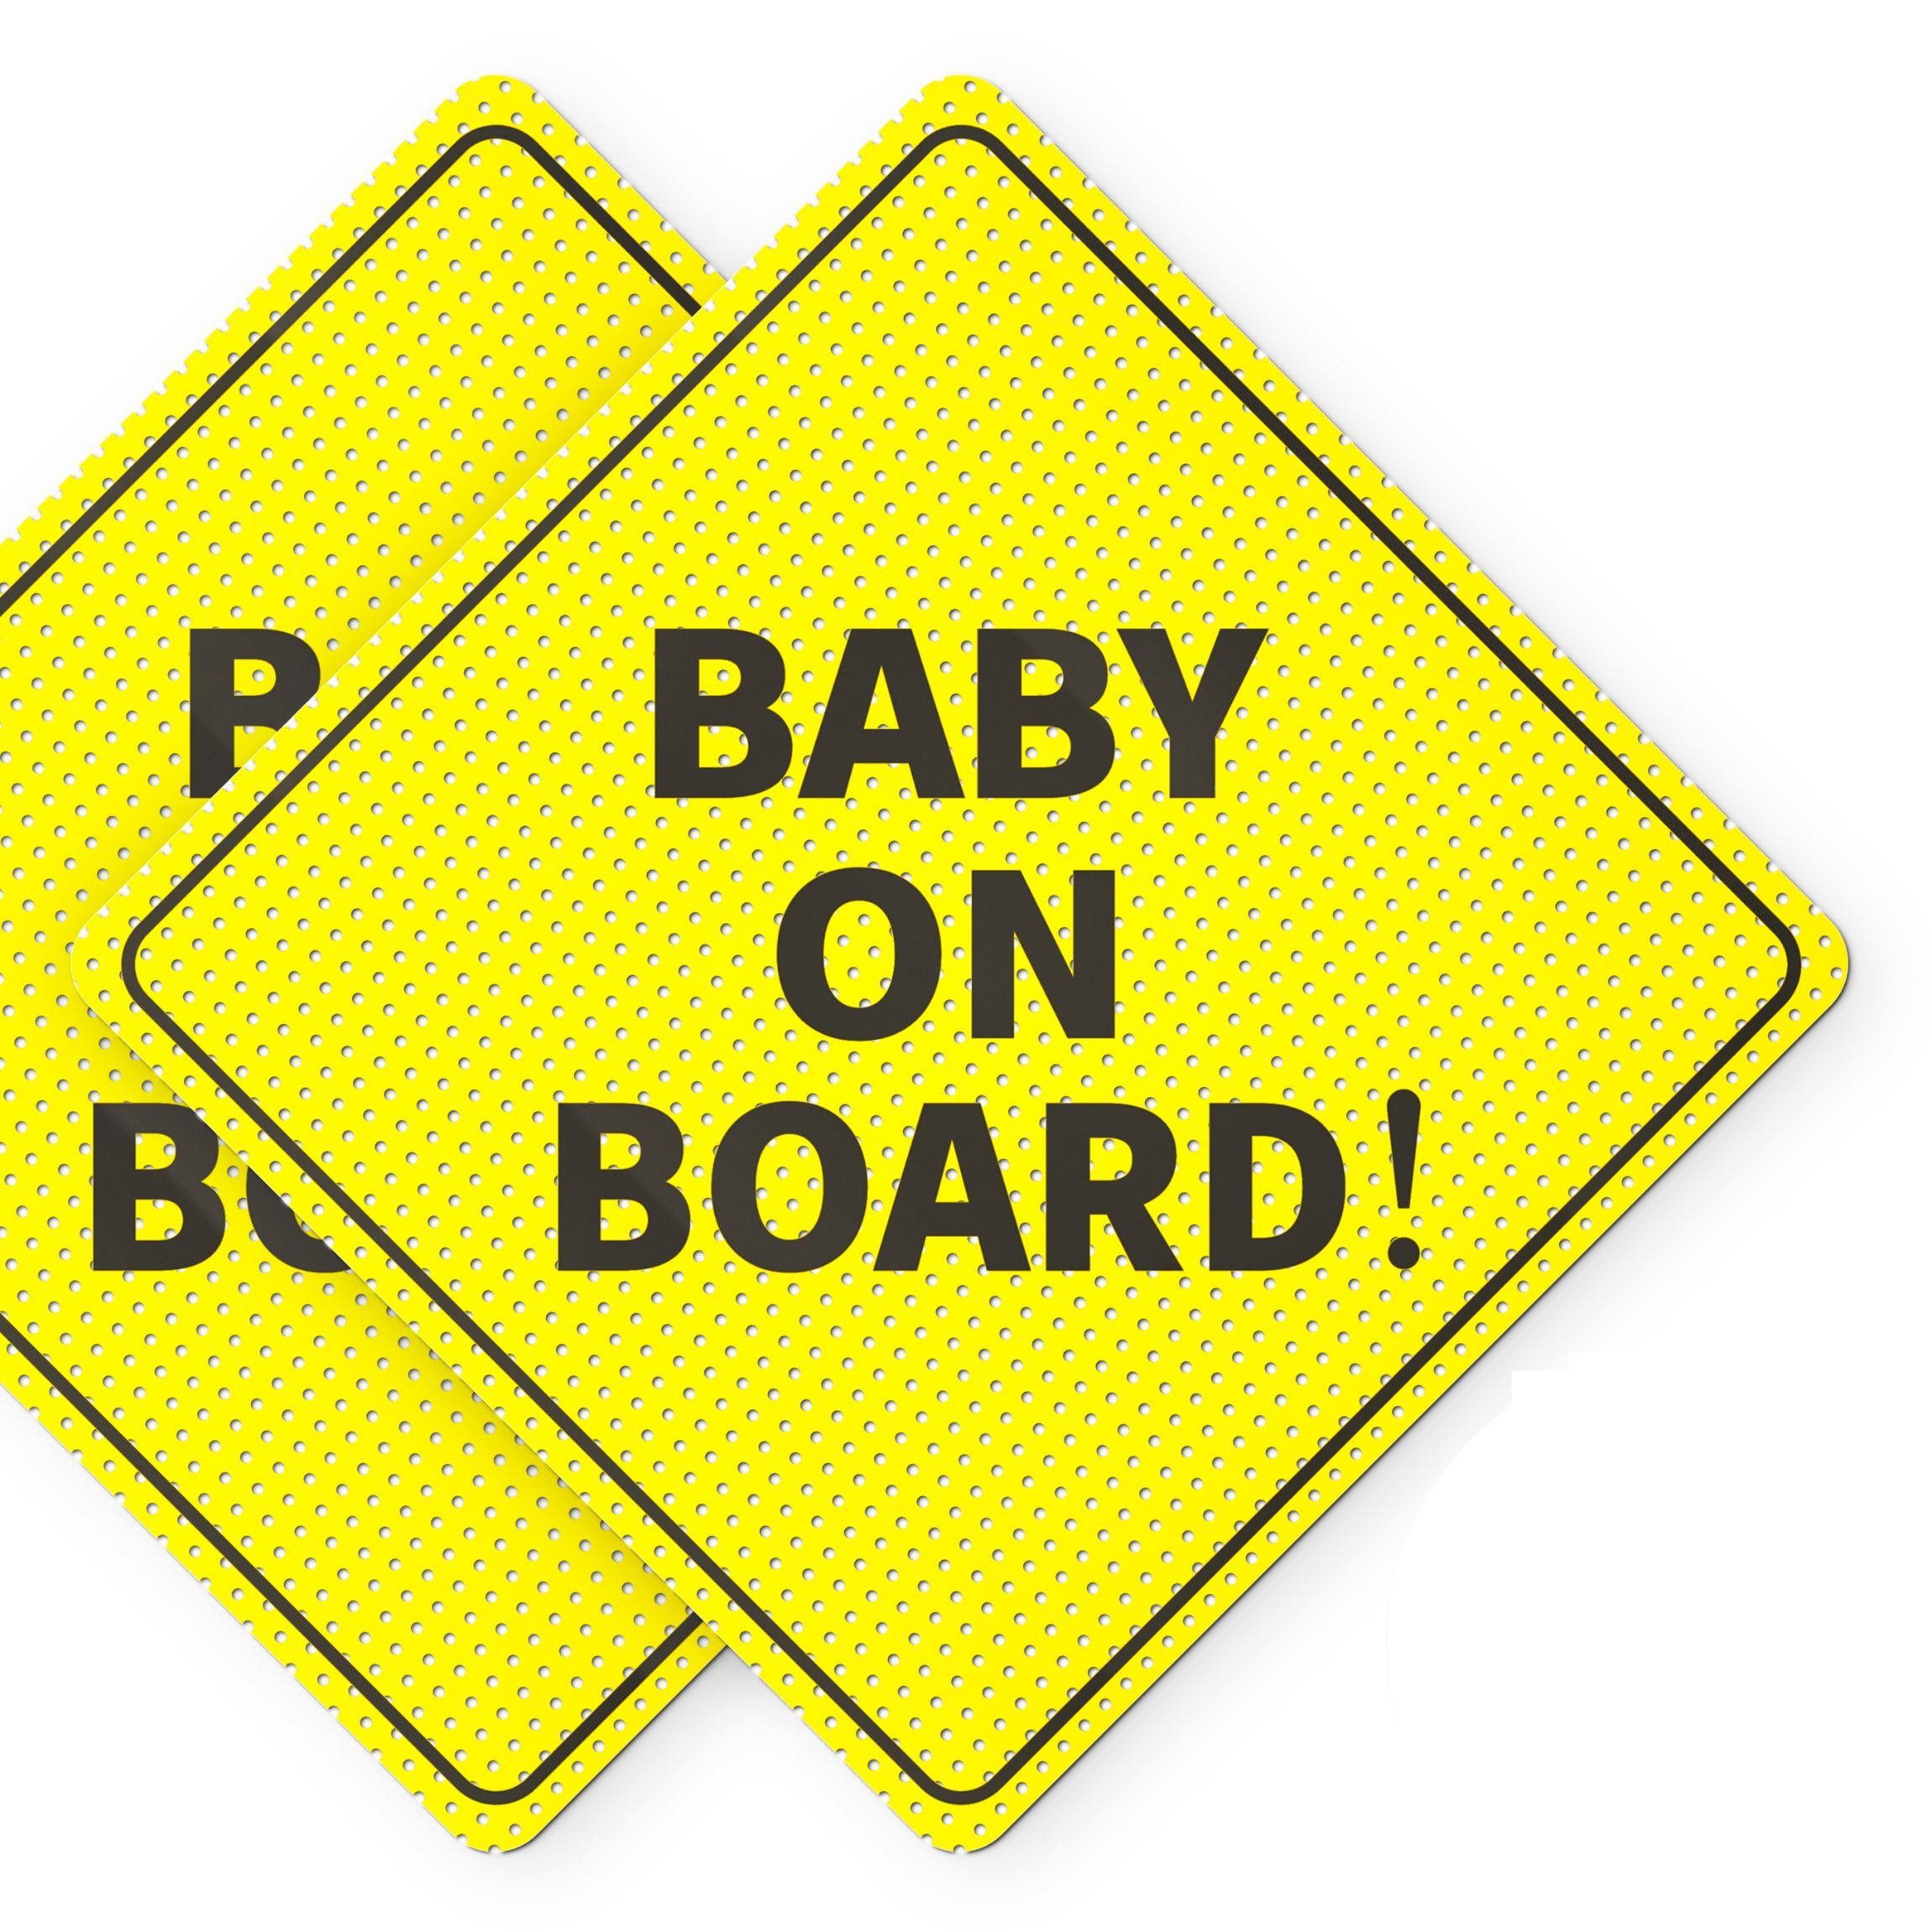 Assured Signs Baby on Board Car Sticker Signs, 2 Pack